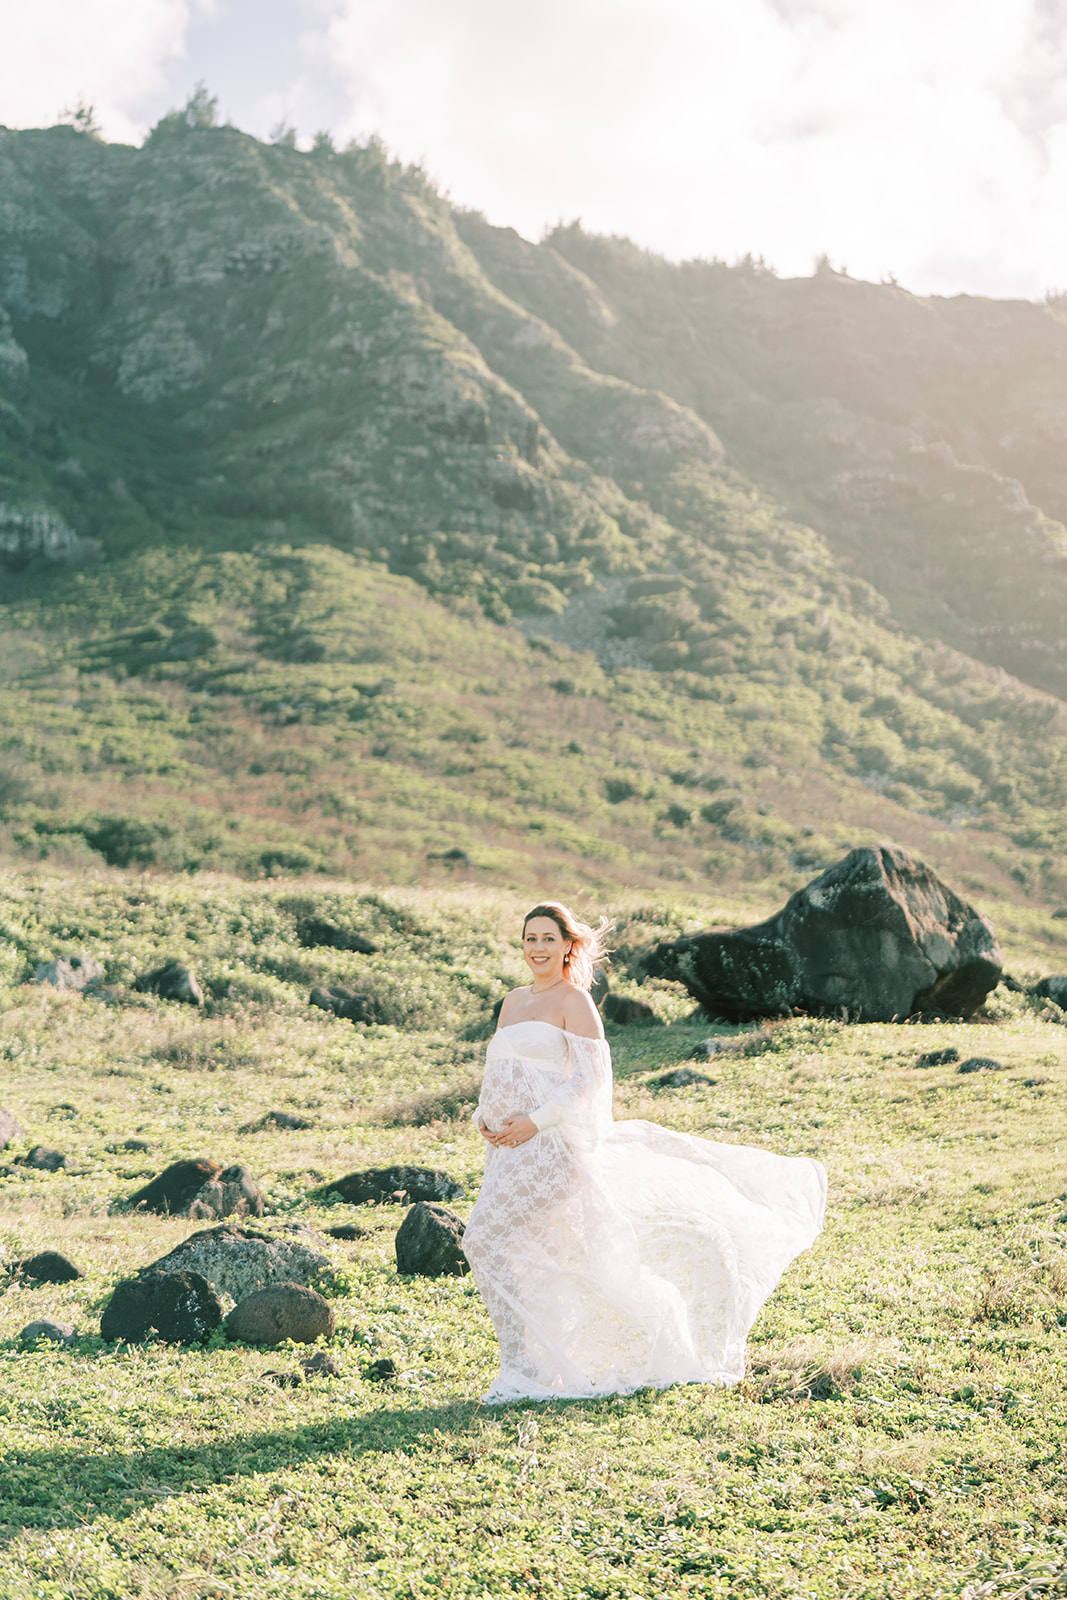 A pregnant woman in white dress twirling in a sunny, grassy field with hills in the background, by an Oahu photographer.